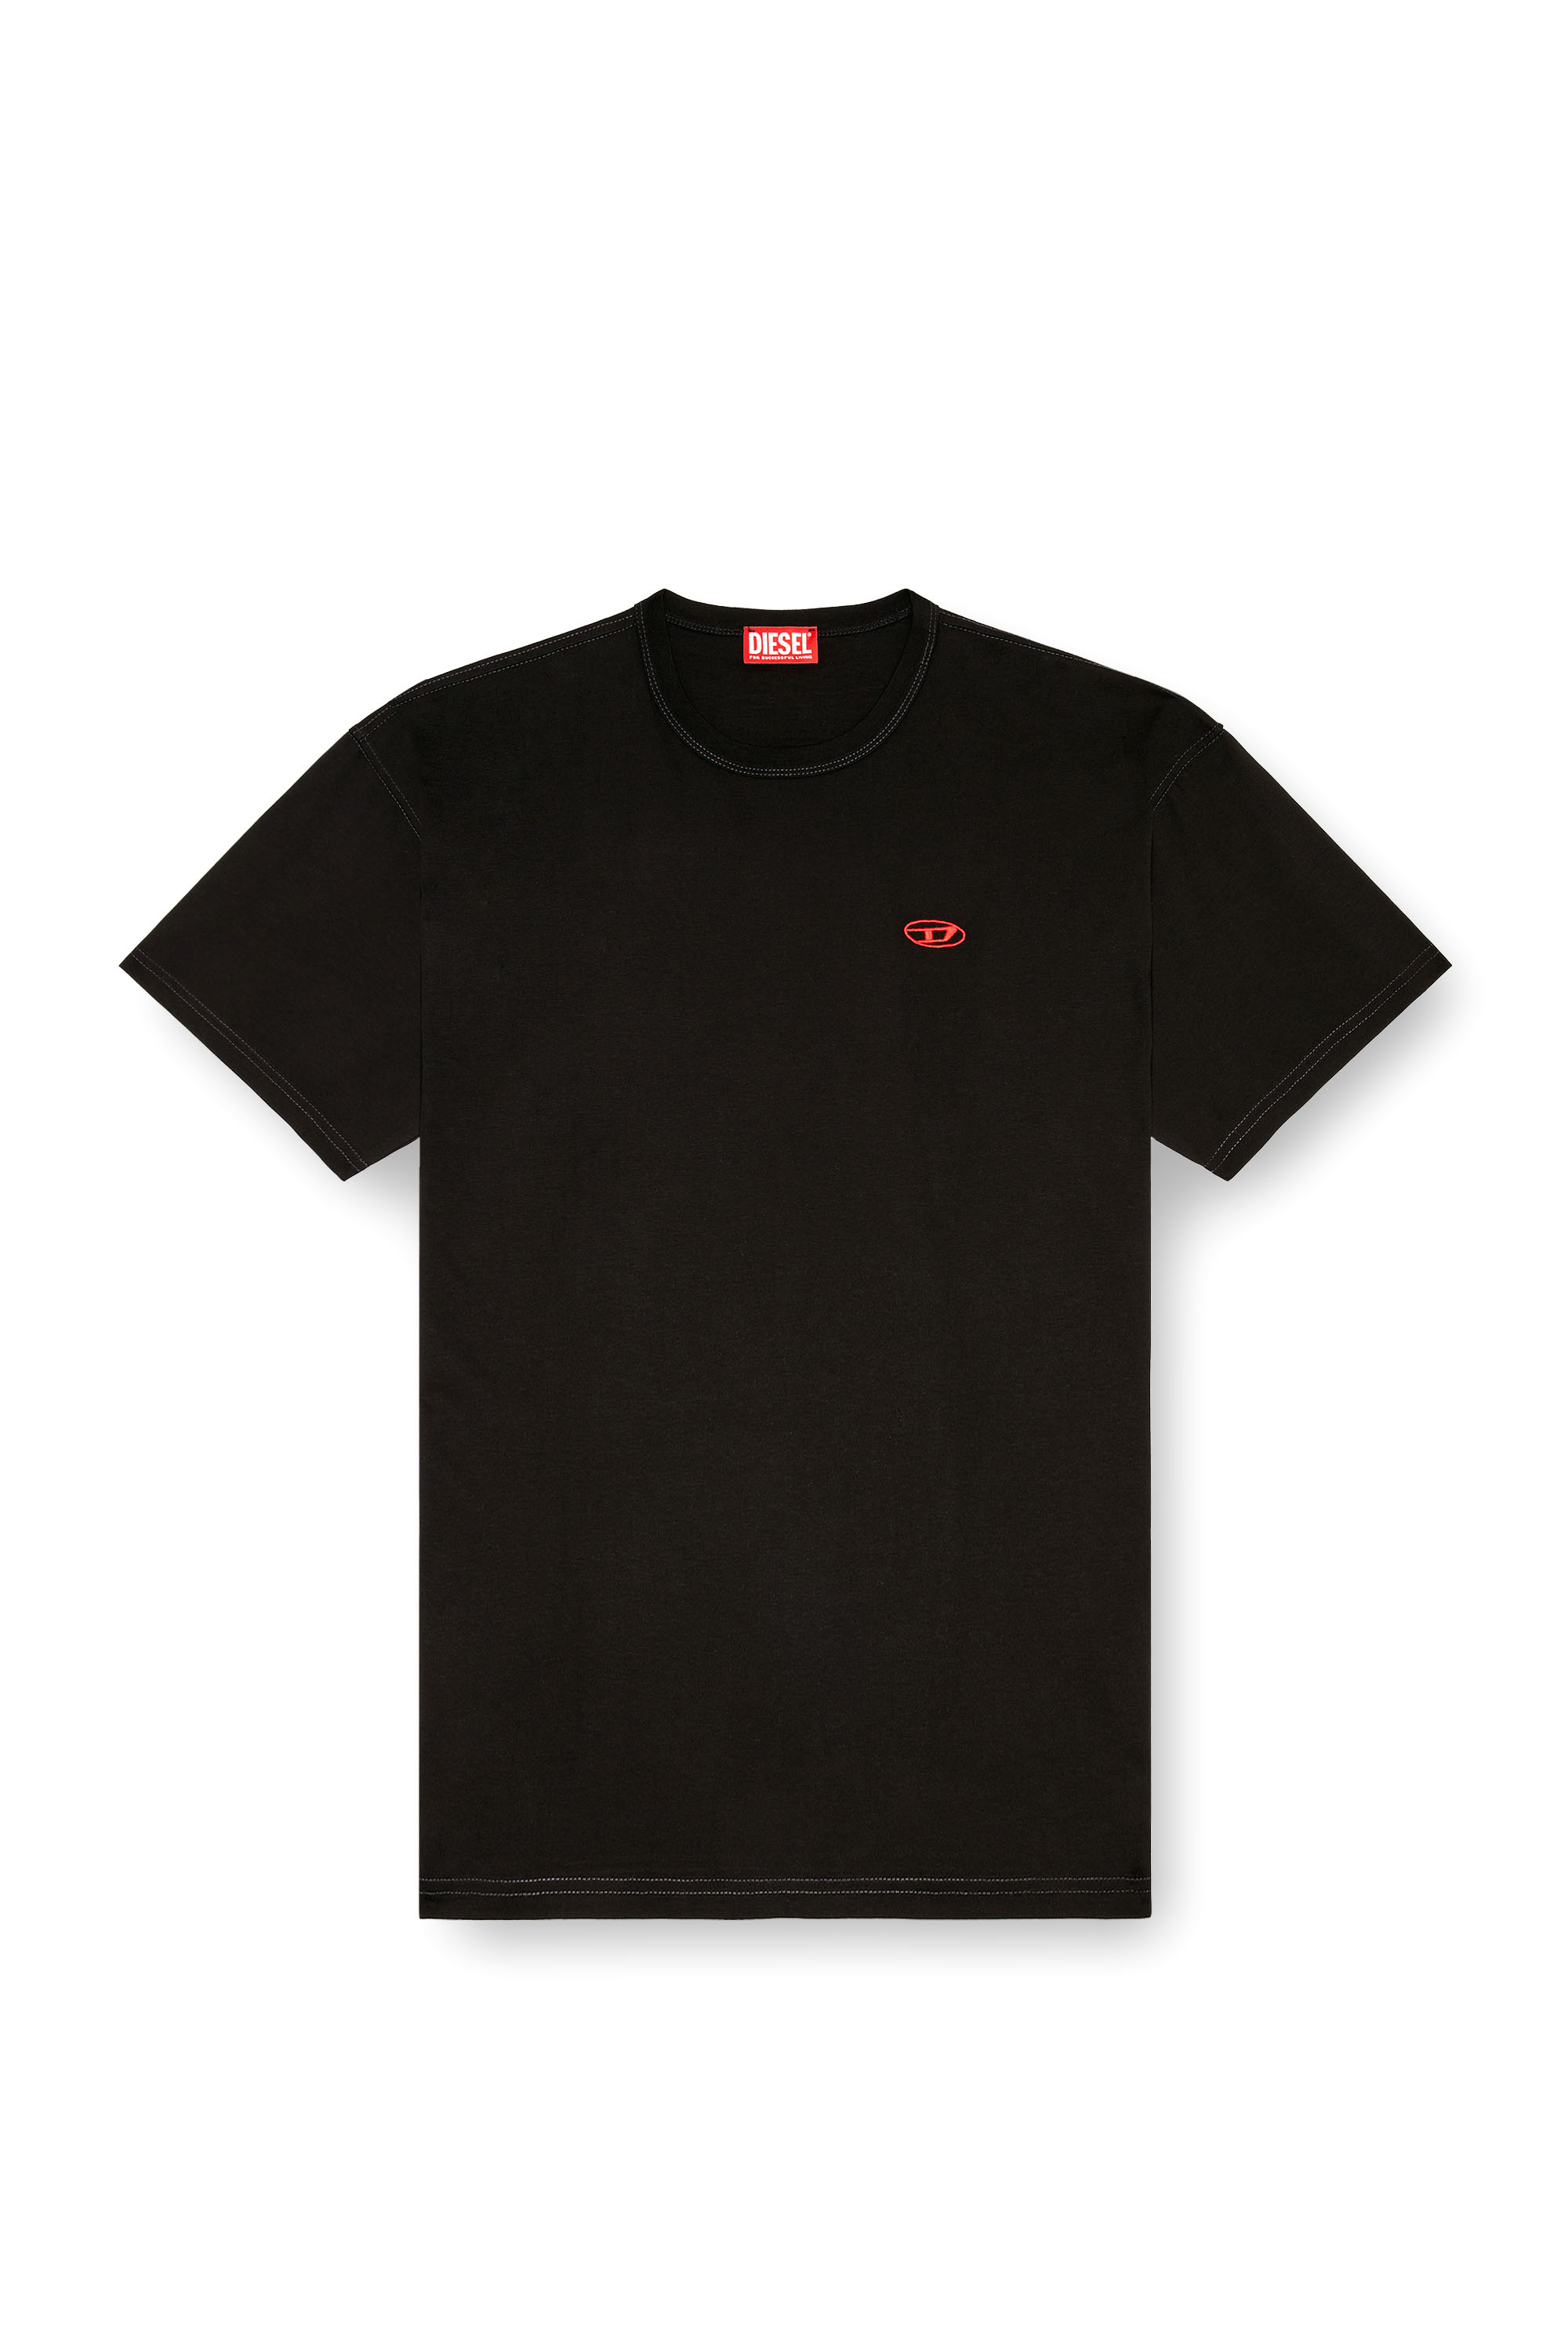 Diesel - T-BOXT-K18, Male T-shirt with Oval D print and embroidery in ブラック - Image 3